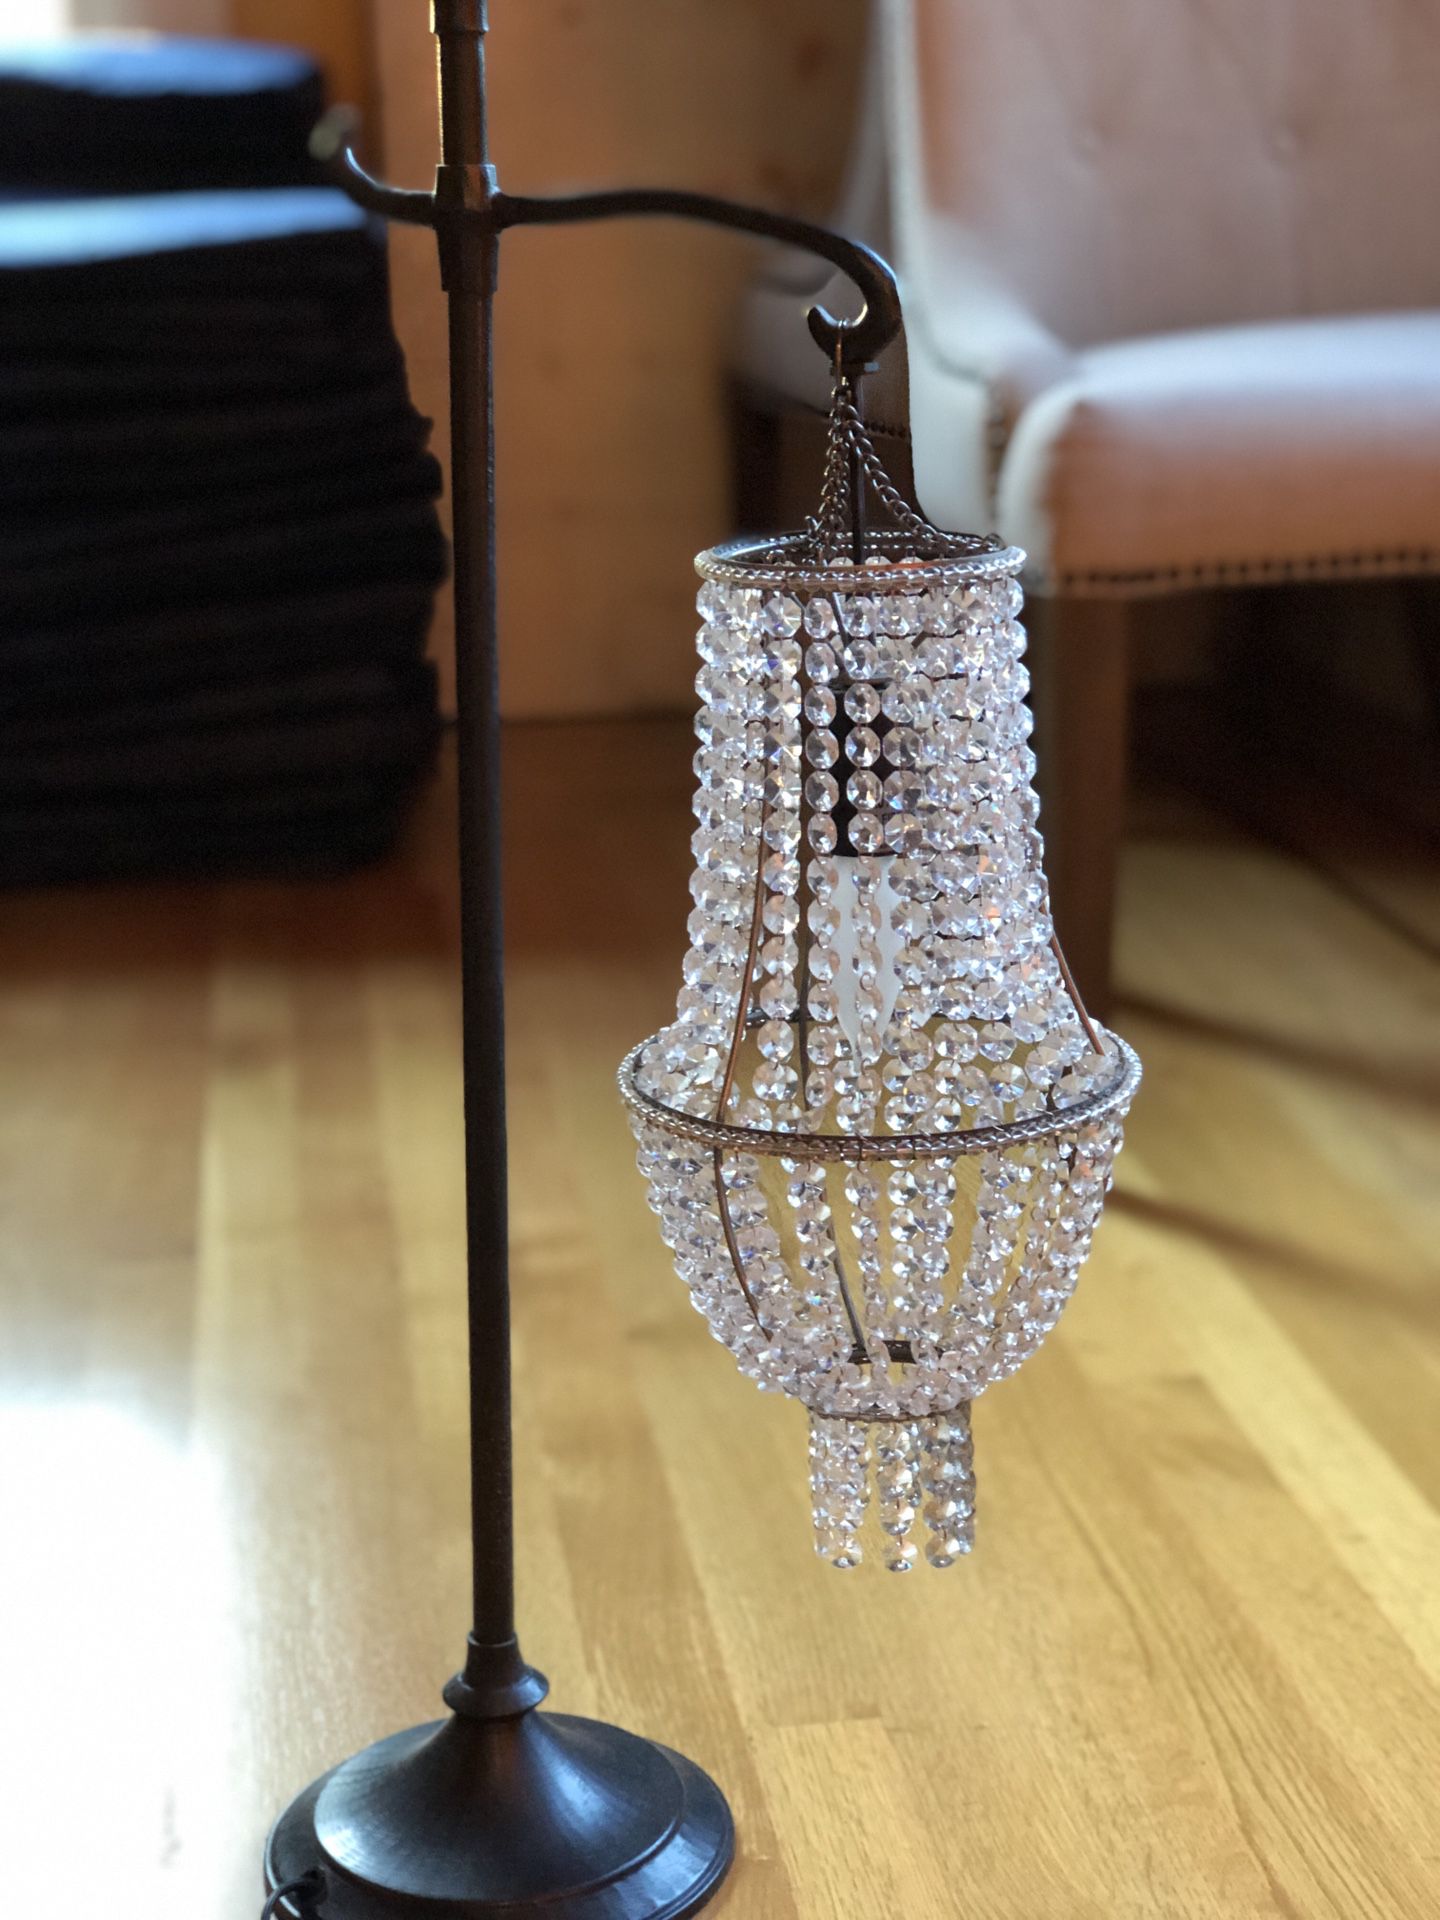 Crystal table lamp - MOVING AND MUST SELL